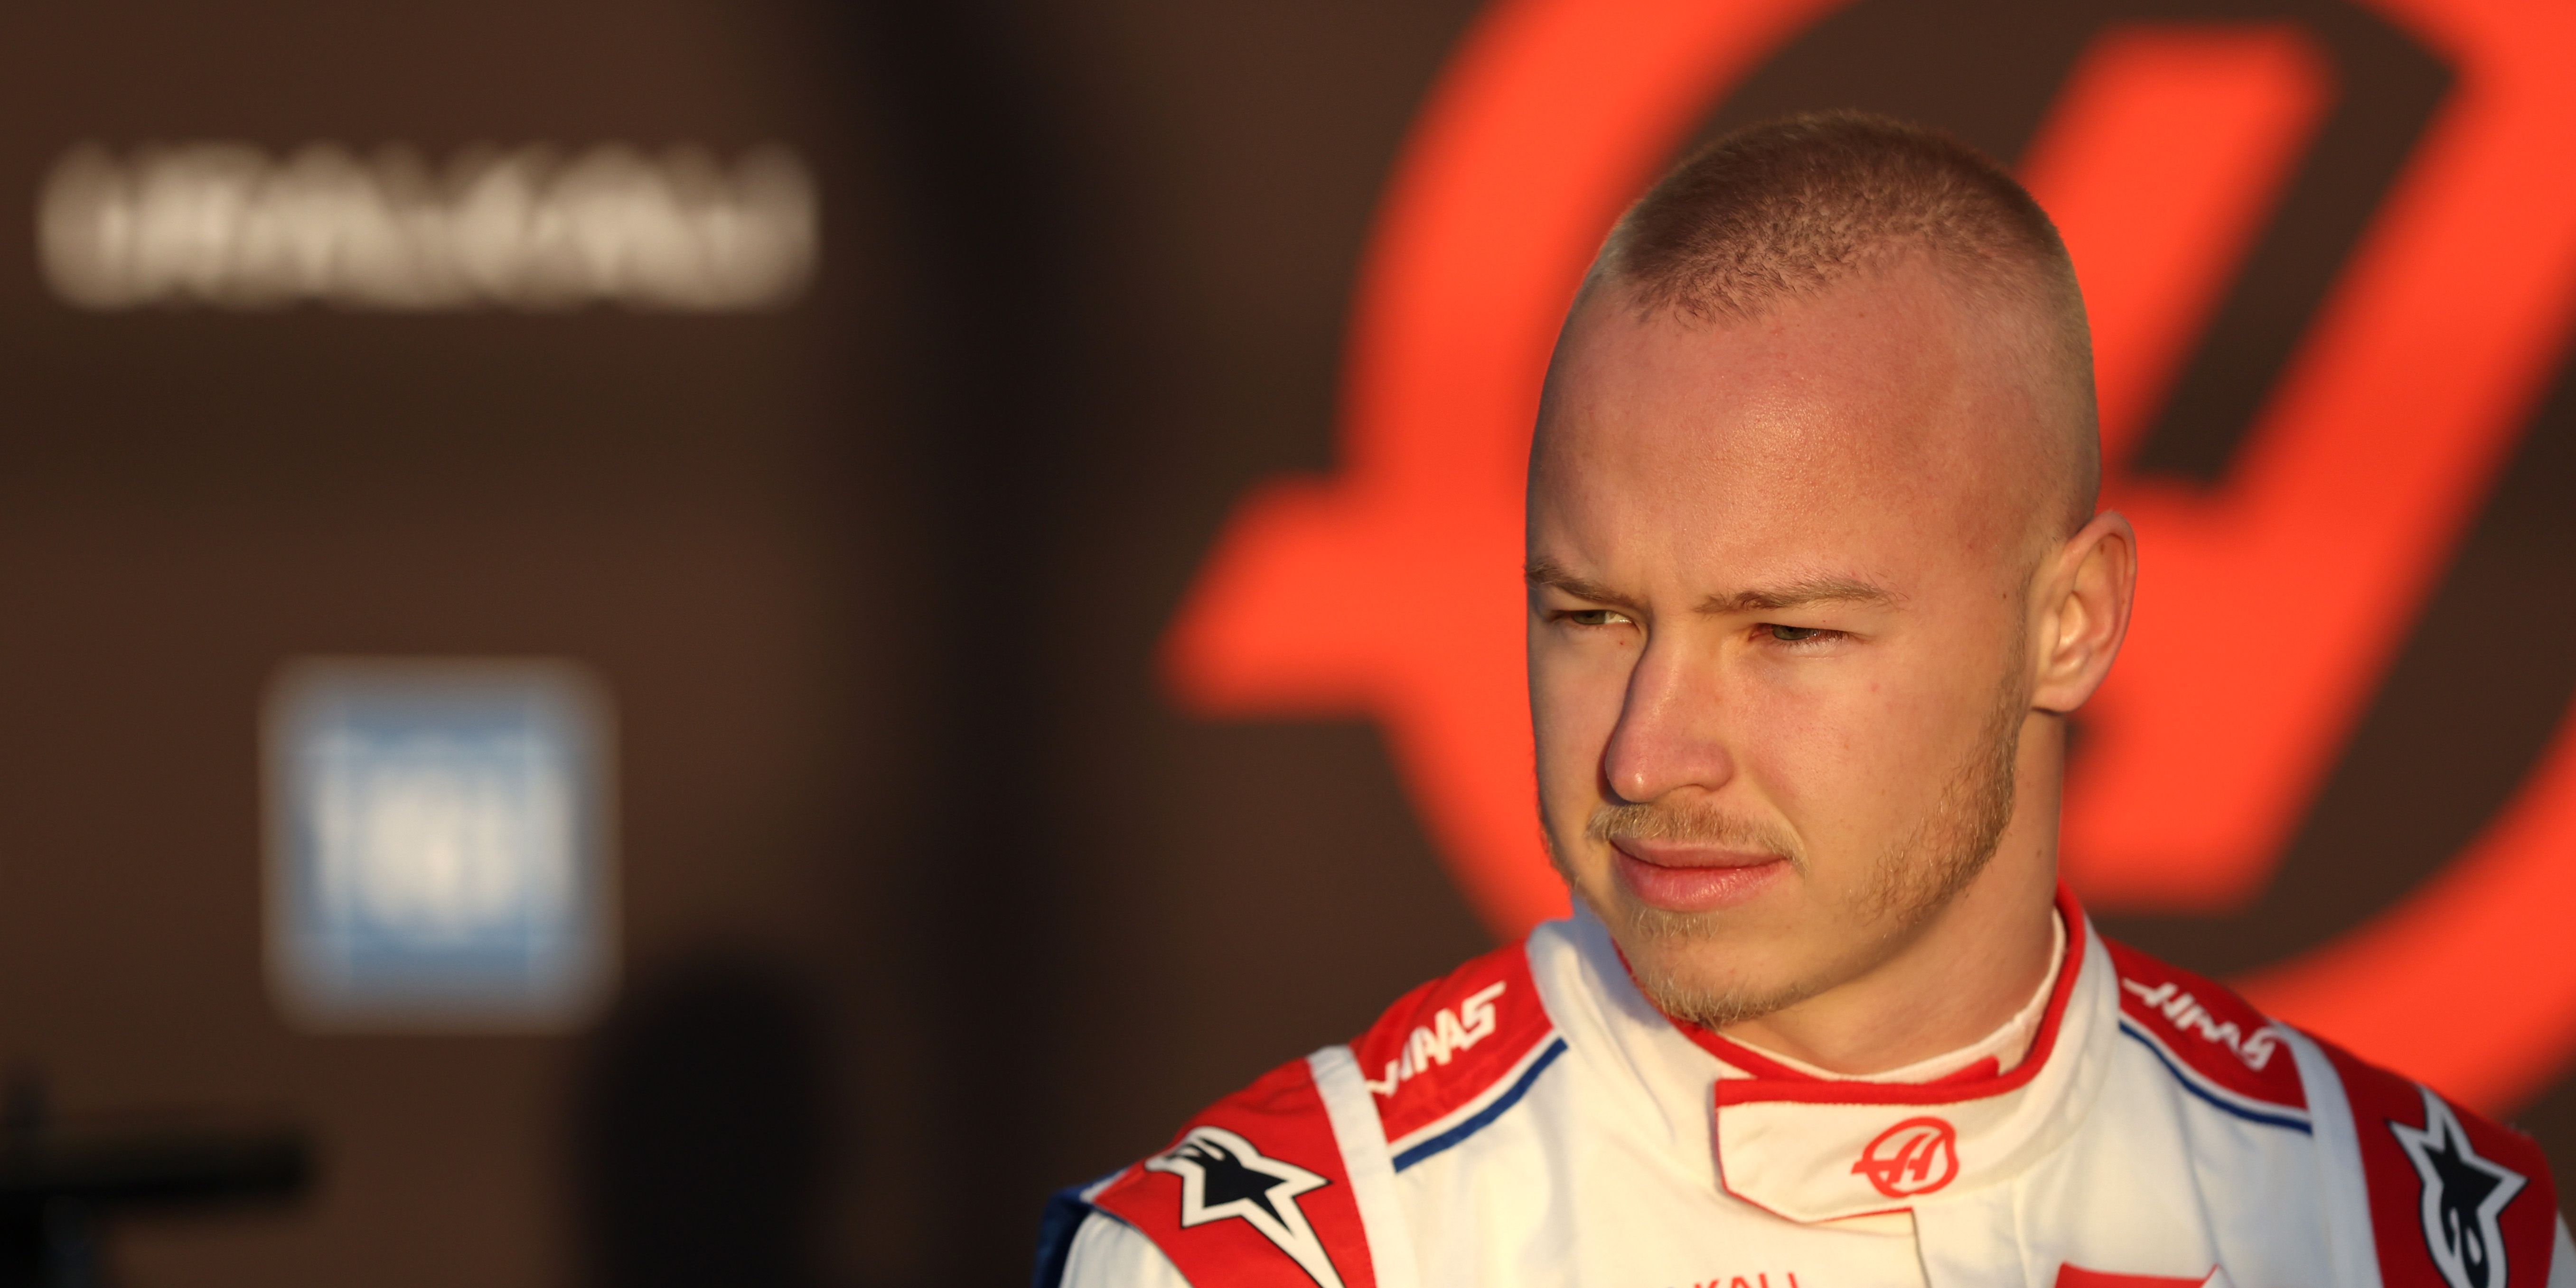 Russian Nikita Mazepin Rips Haas F1 for Firing, Says He's Lost Trust in Team